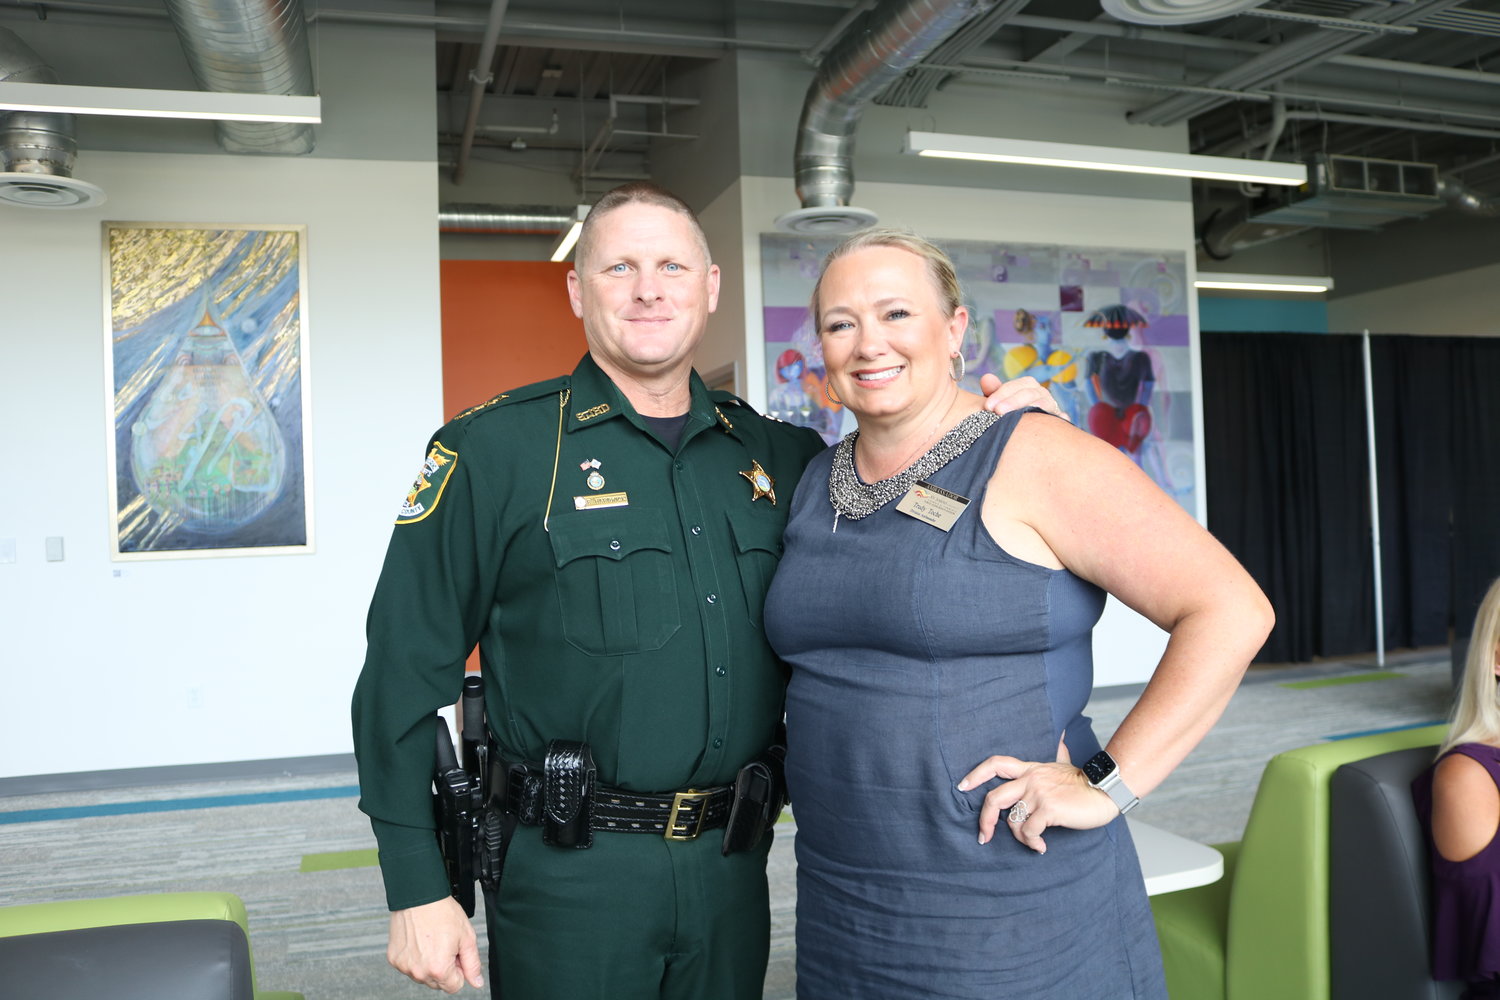 Sheriff Robert Hardwick and Trudy Toche at the Chamber at Noon event on July 14 at the link.